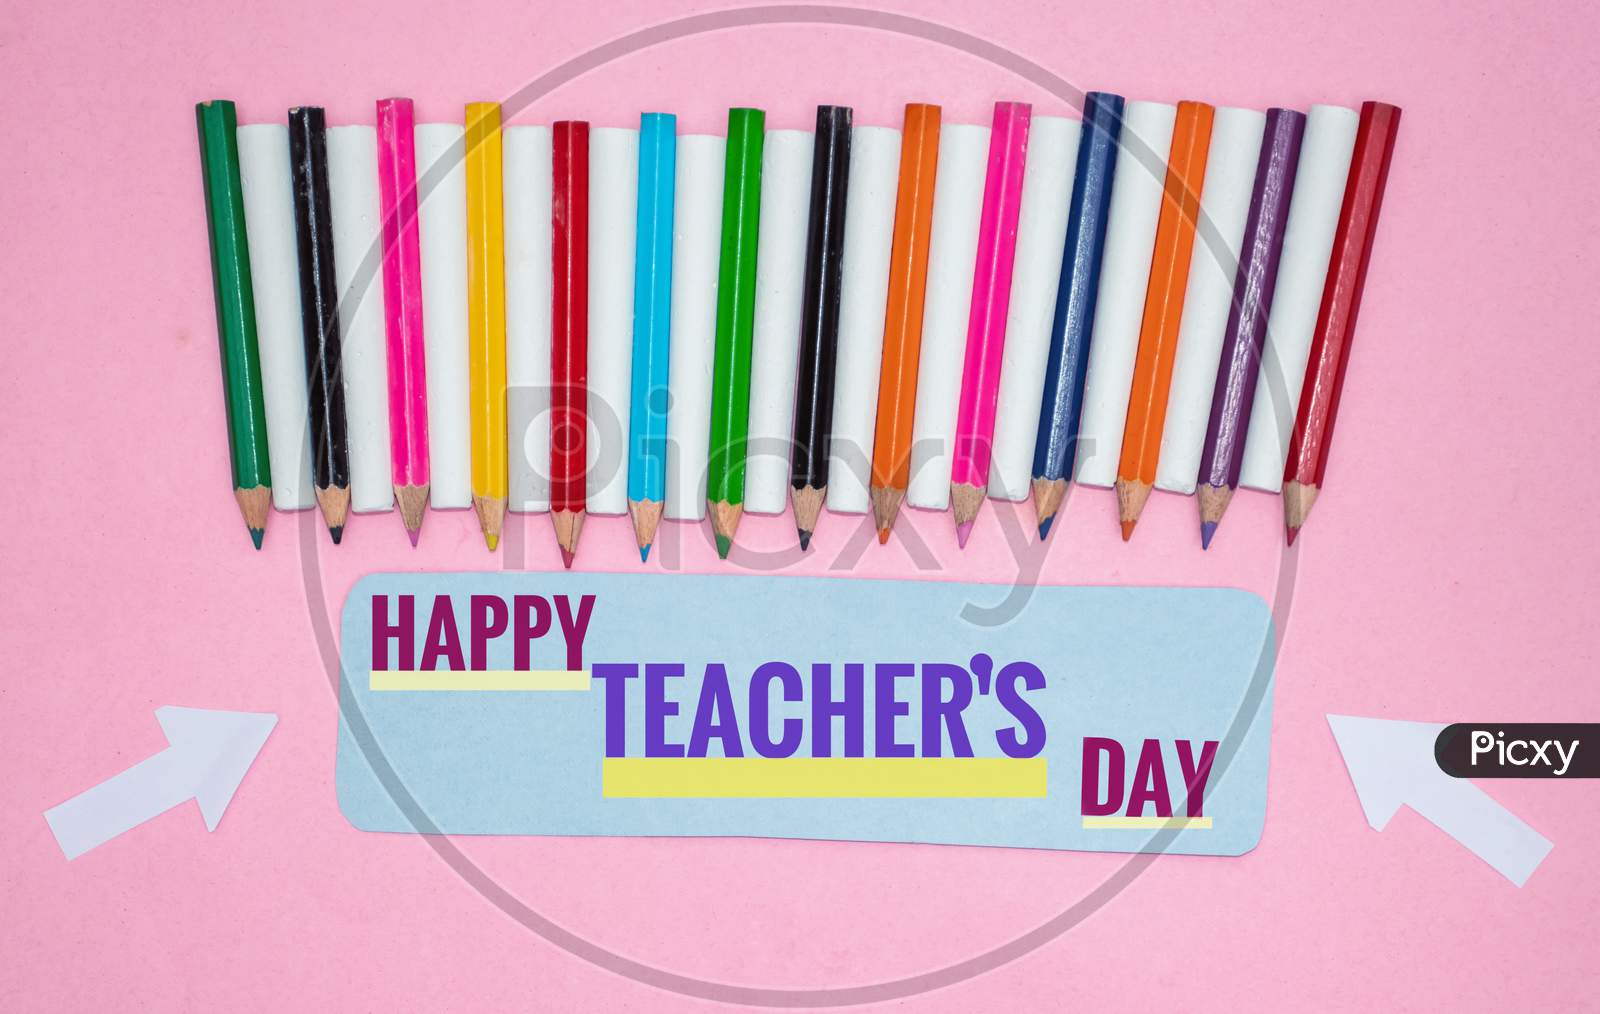 Creative Photo Of Happy Teacher's Day With Color Pencils And Chalks